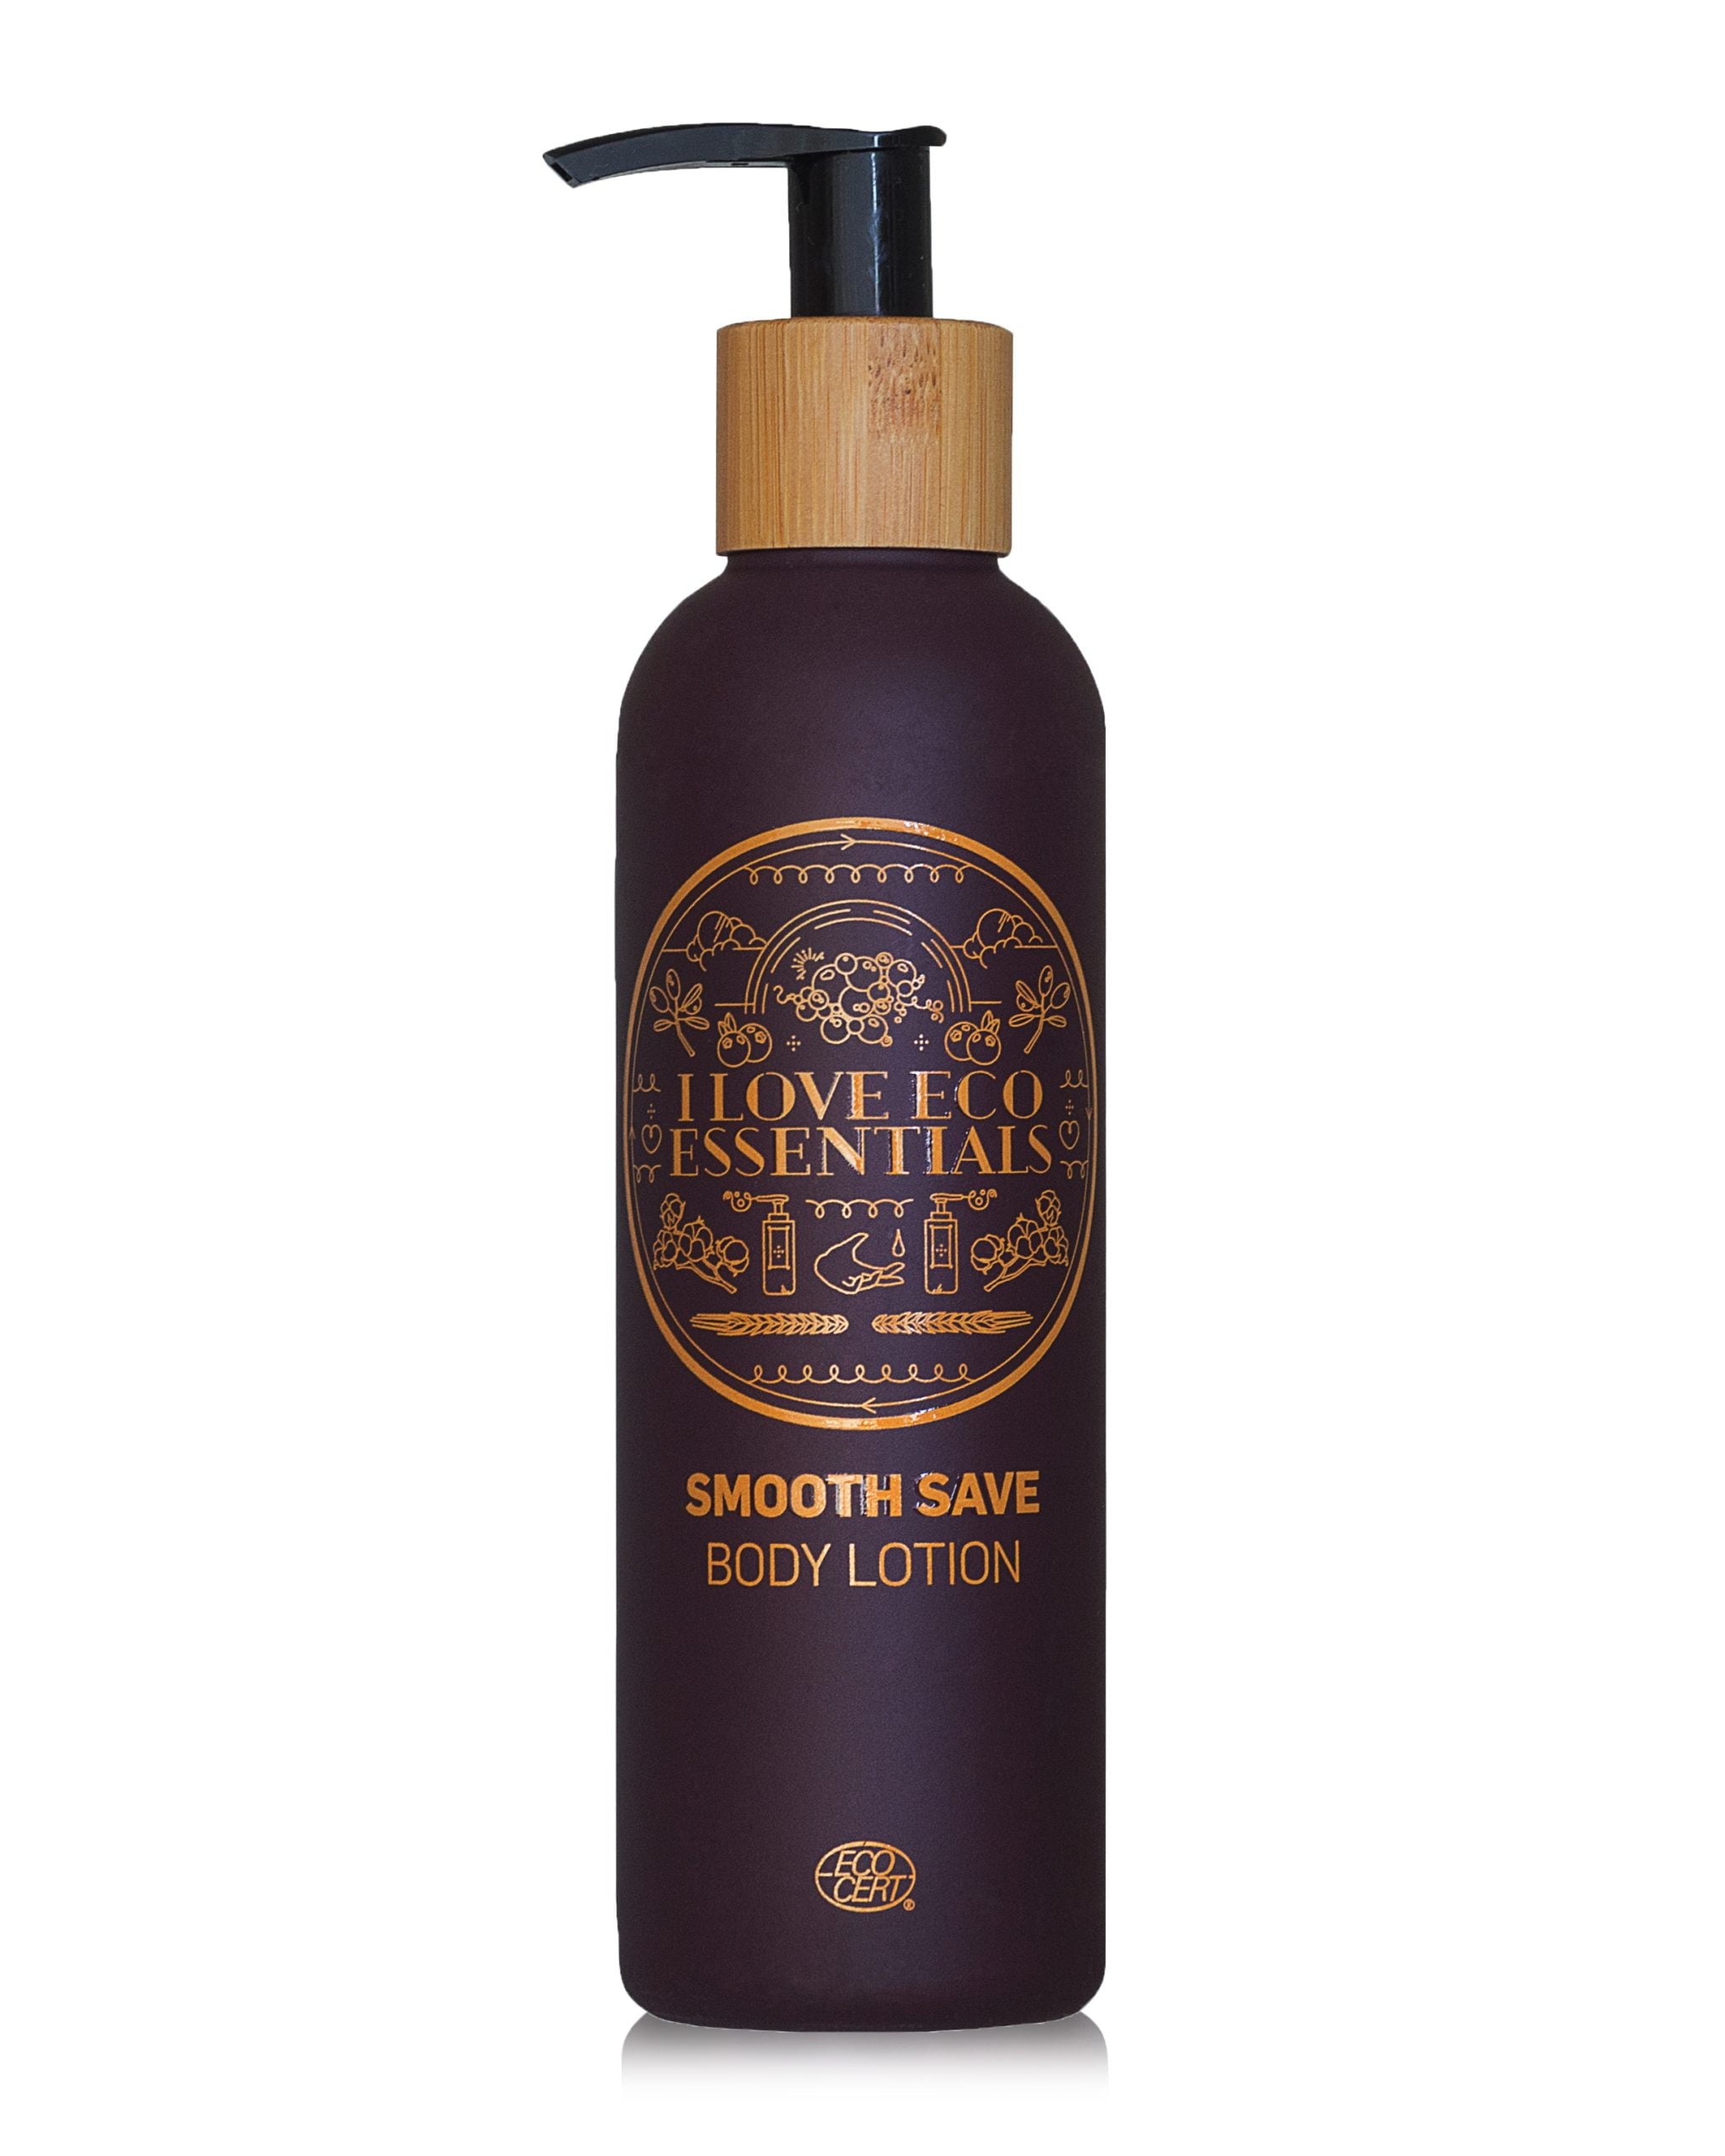 Smooth Save body lotion